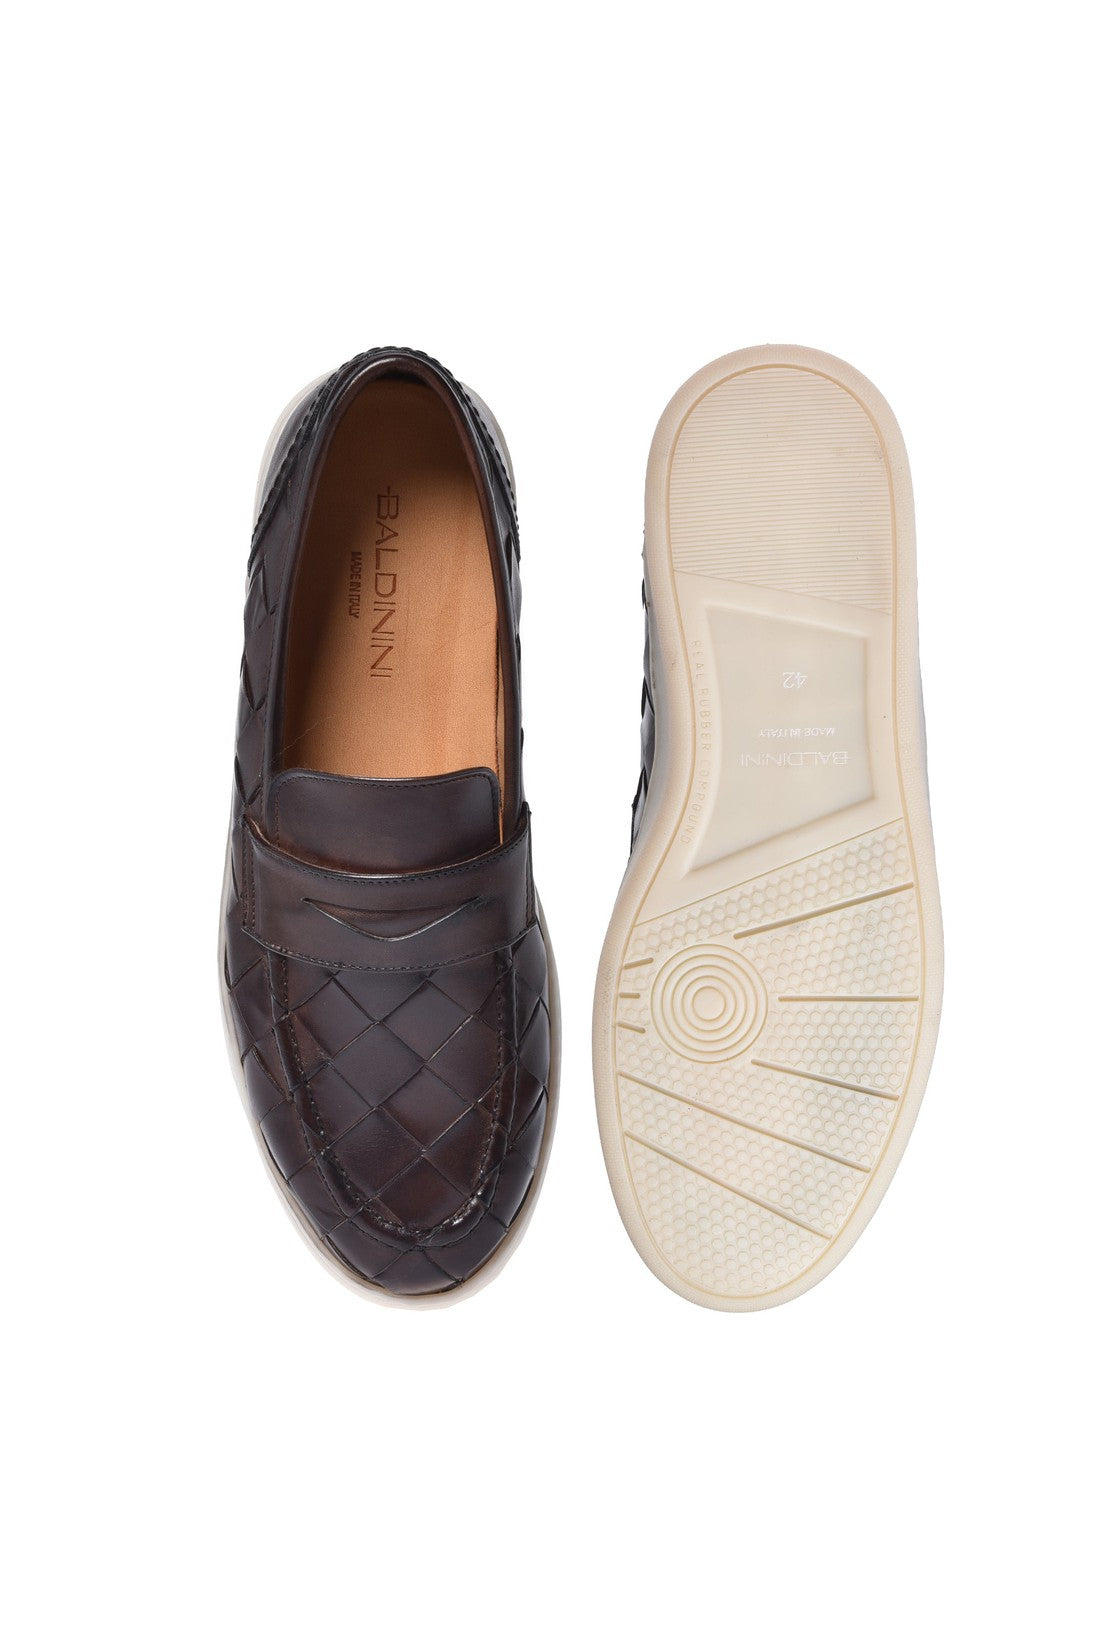 Dark brown woven leather loafer